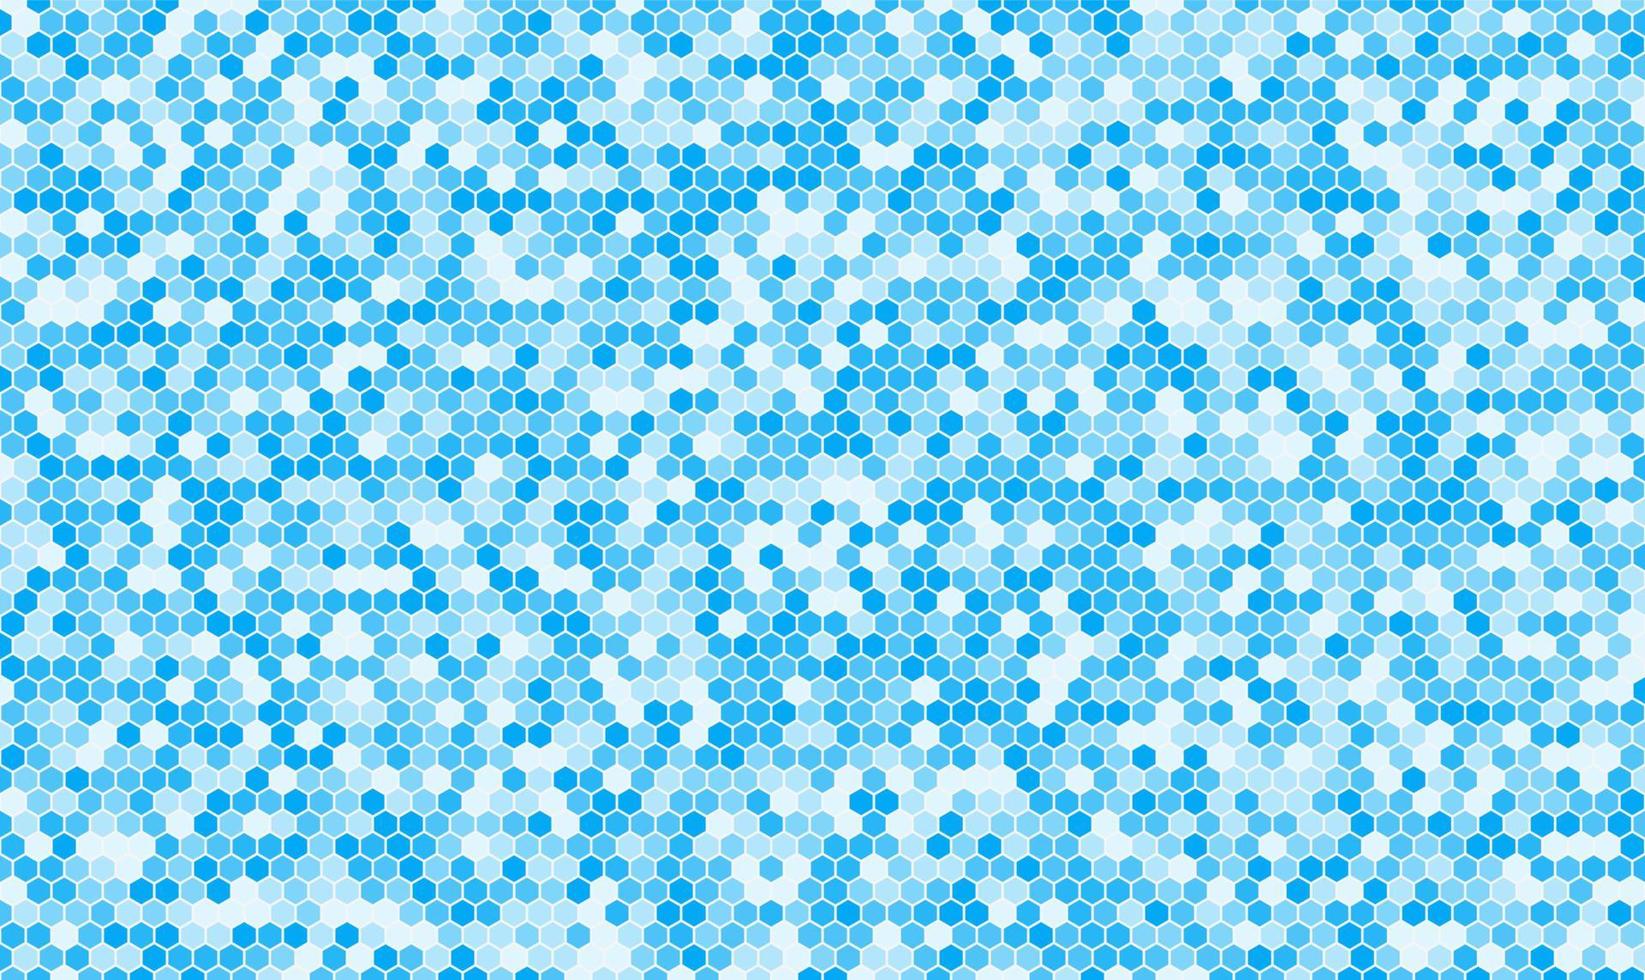 Abstract modern blue random color with small hexagon or honeycomb shape pattern background. vector